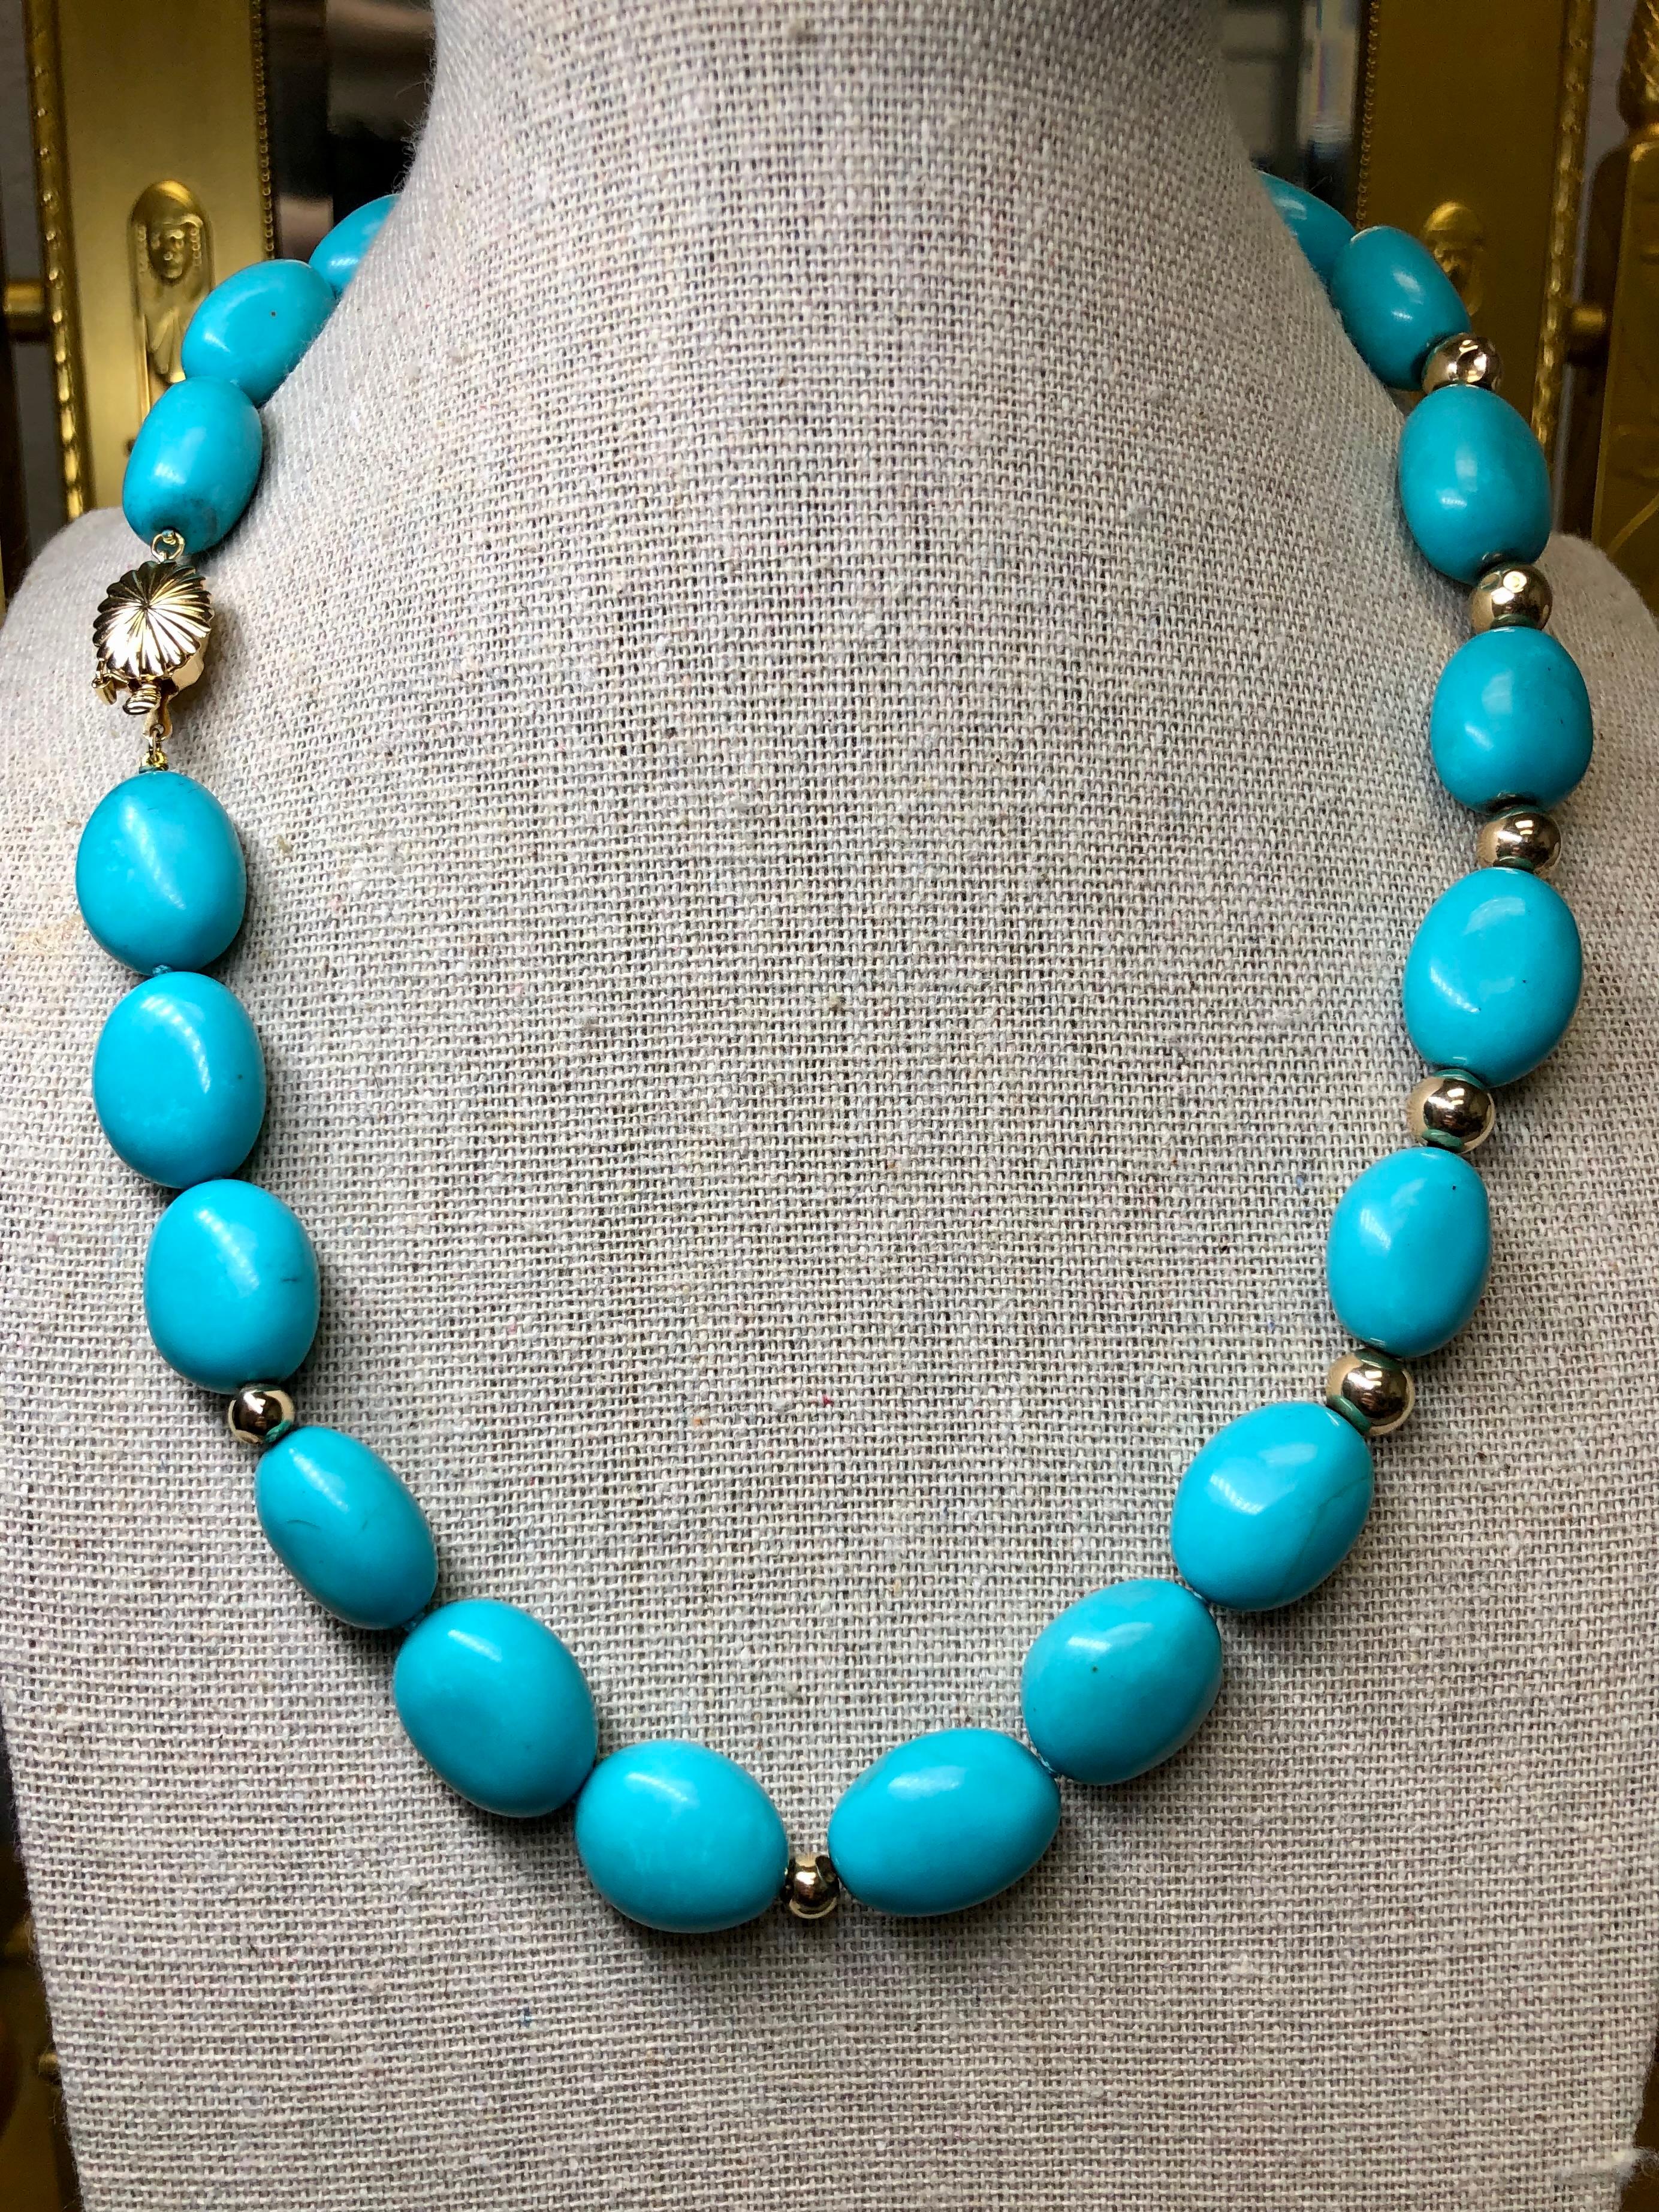 
A gorgeous turquoise necklace strung with 22 polished turquoise stones separated by 14K rondells with a 14K clasp. Beautiful color.


Dimensions/Weight:

Necklace measures 18” and weighs 87.4g.


Condition:

All stones are strung securely and